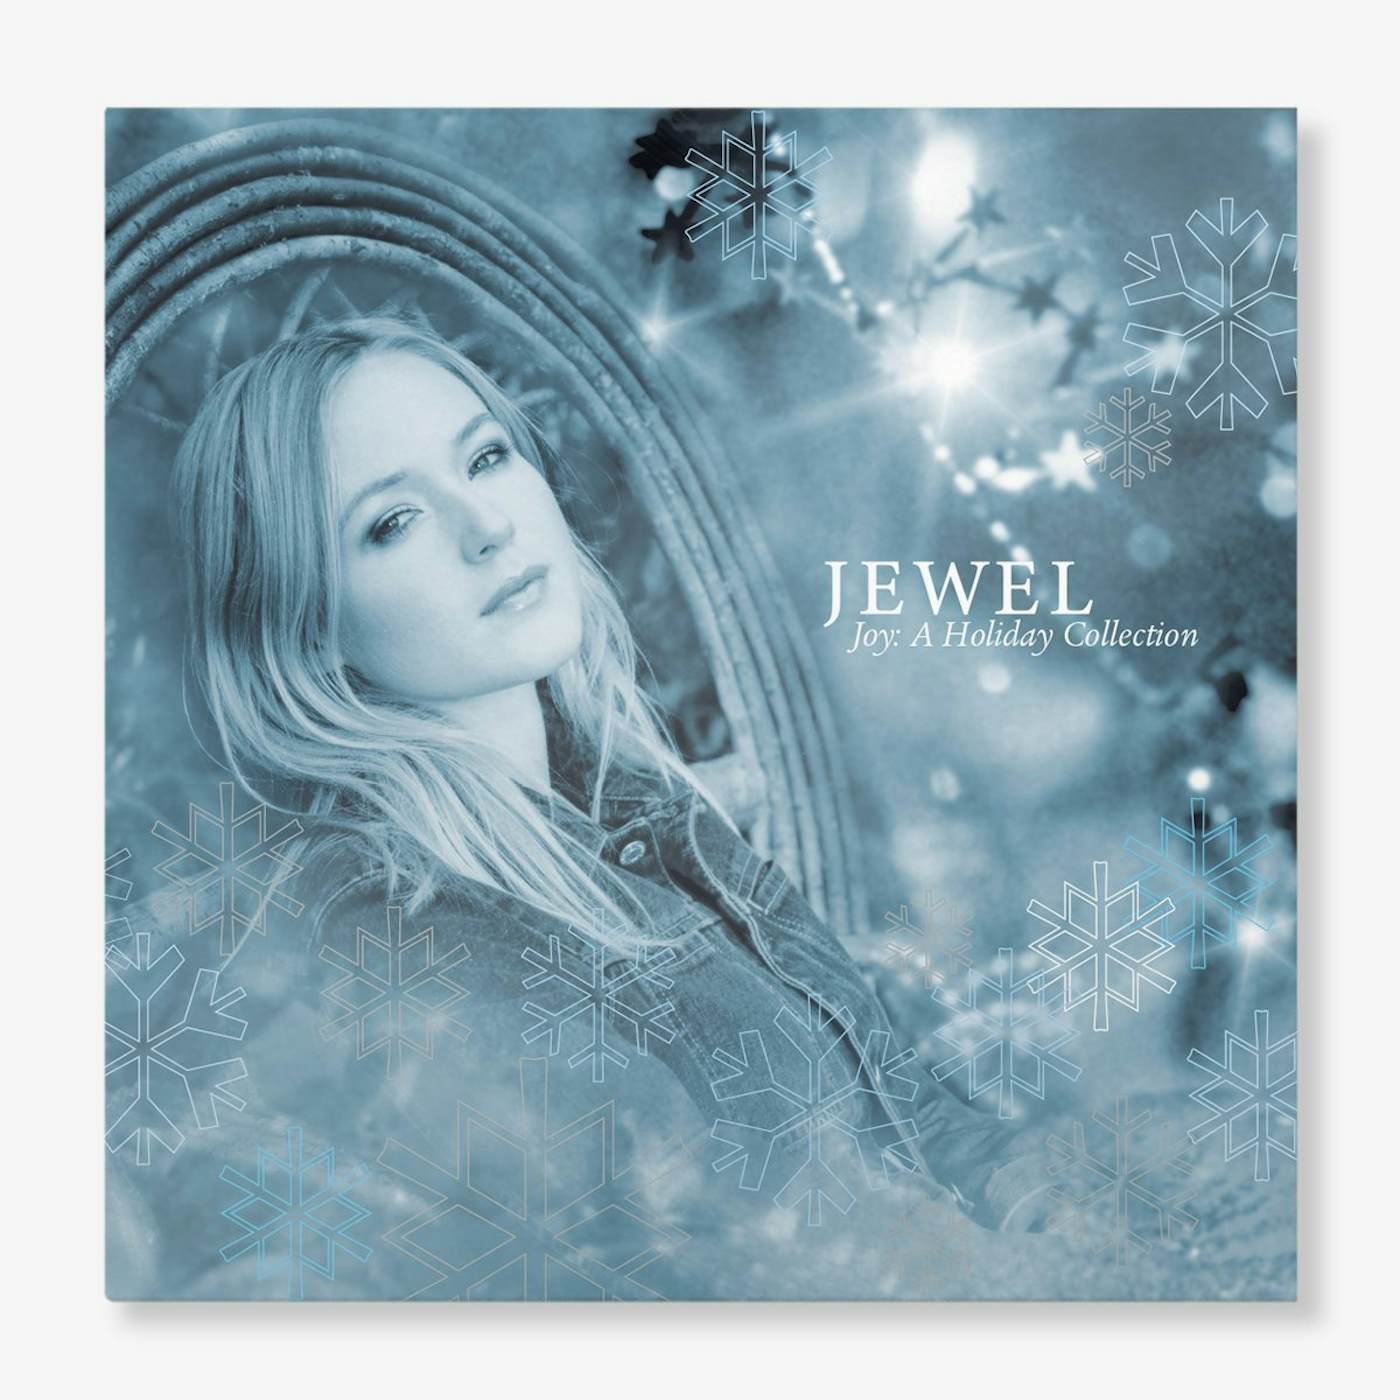 Jewel Joy: A Holiday Collection (CD)